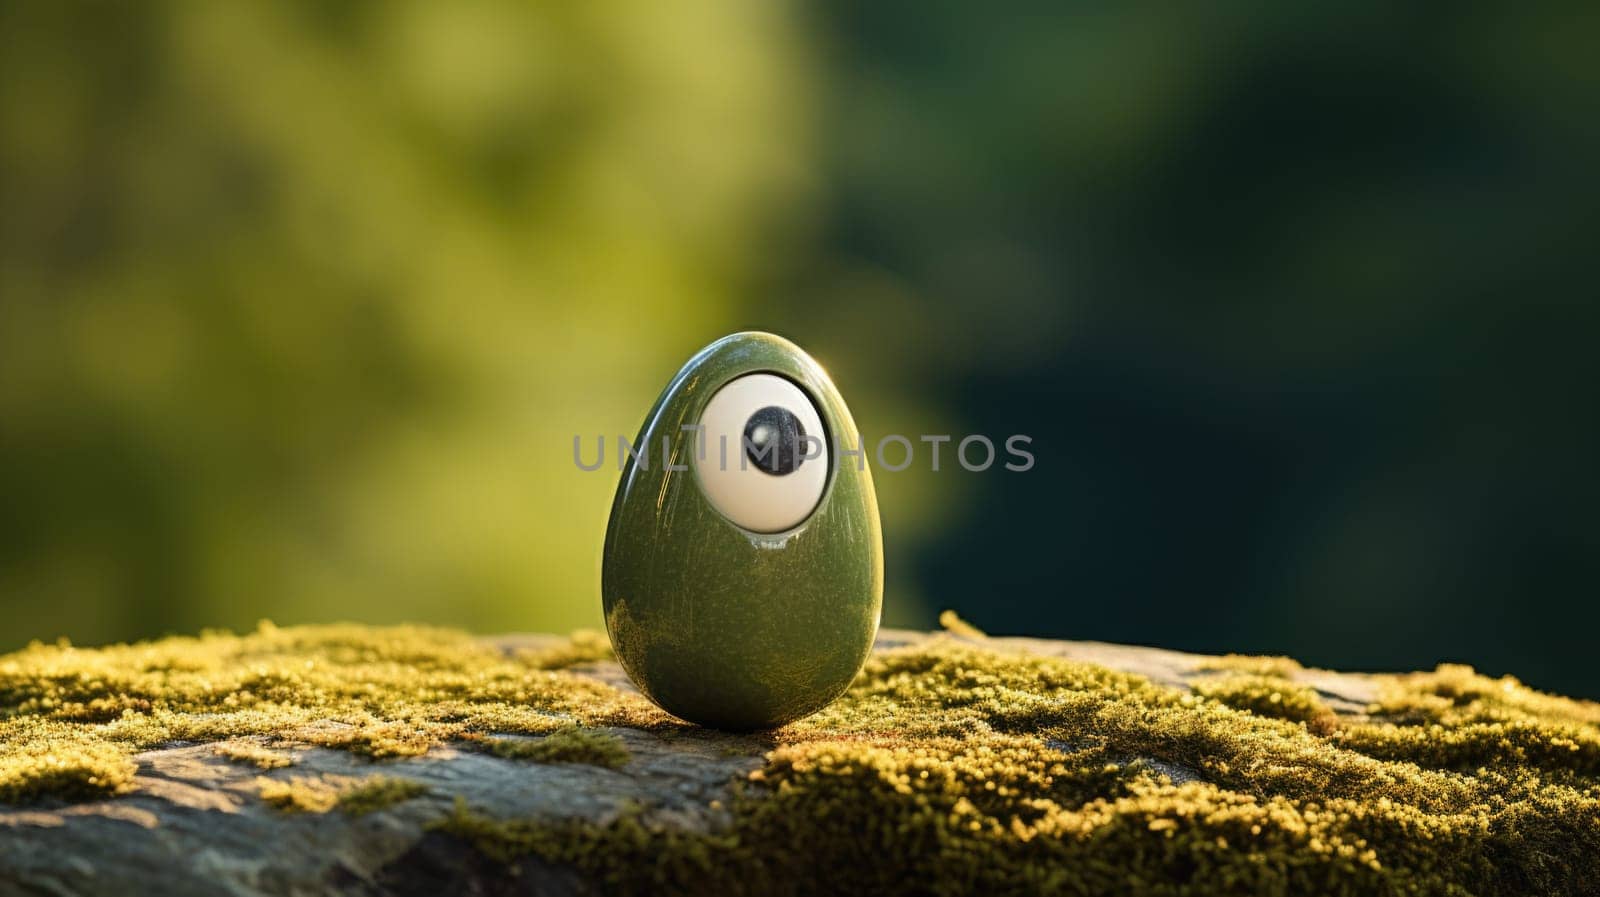 A green ball with a large eye sitting on top of a rock. Pareidolia.